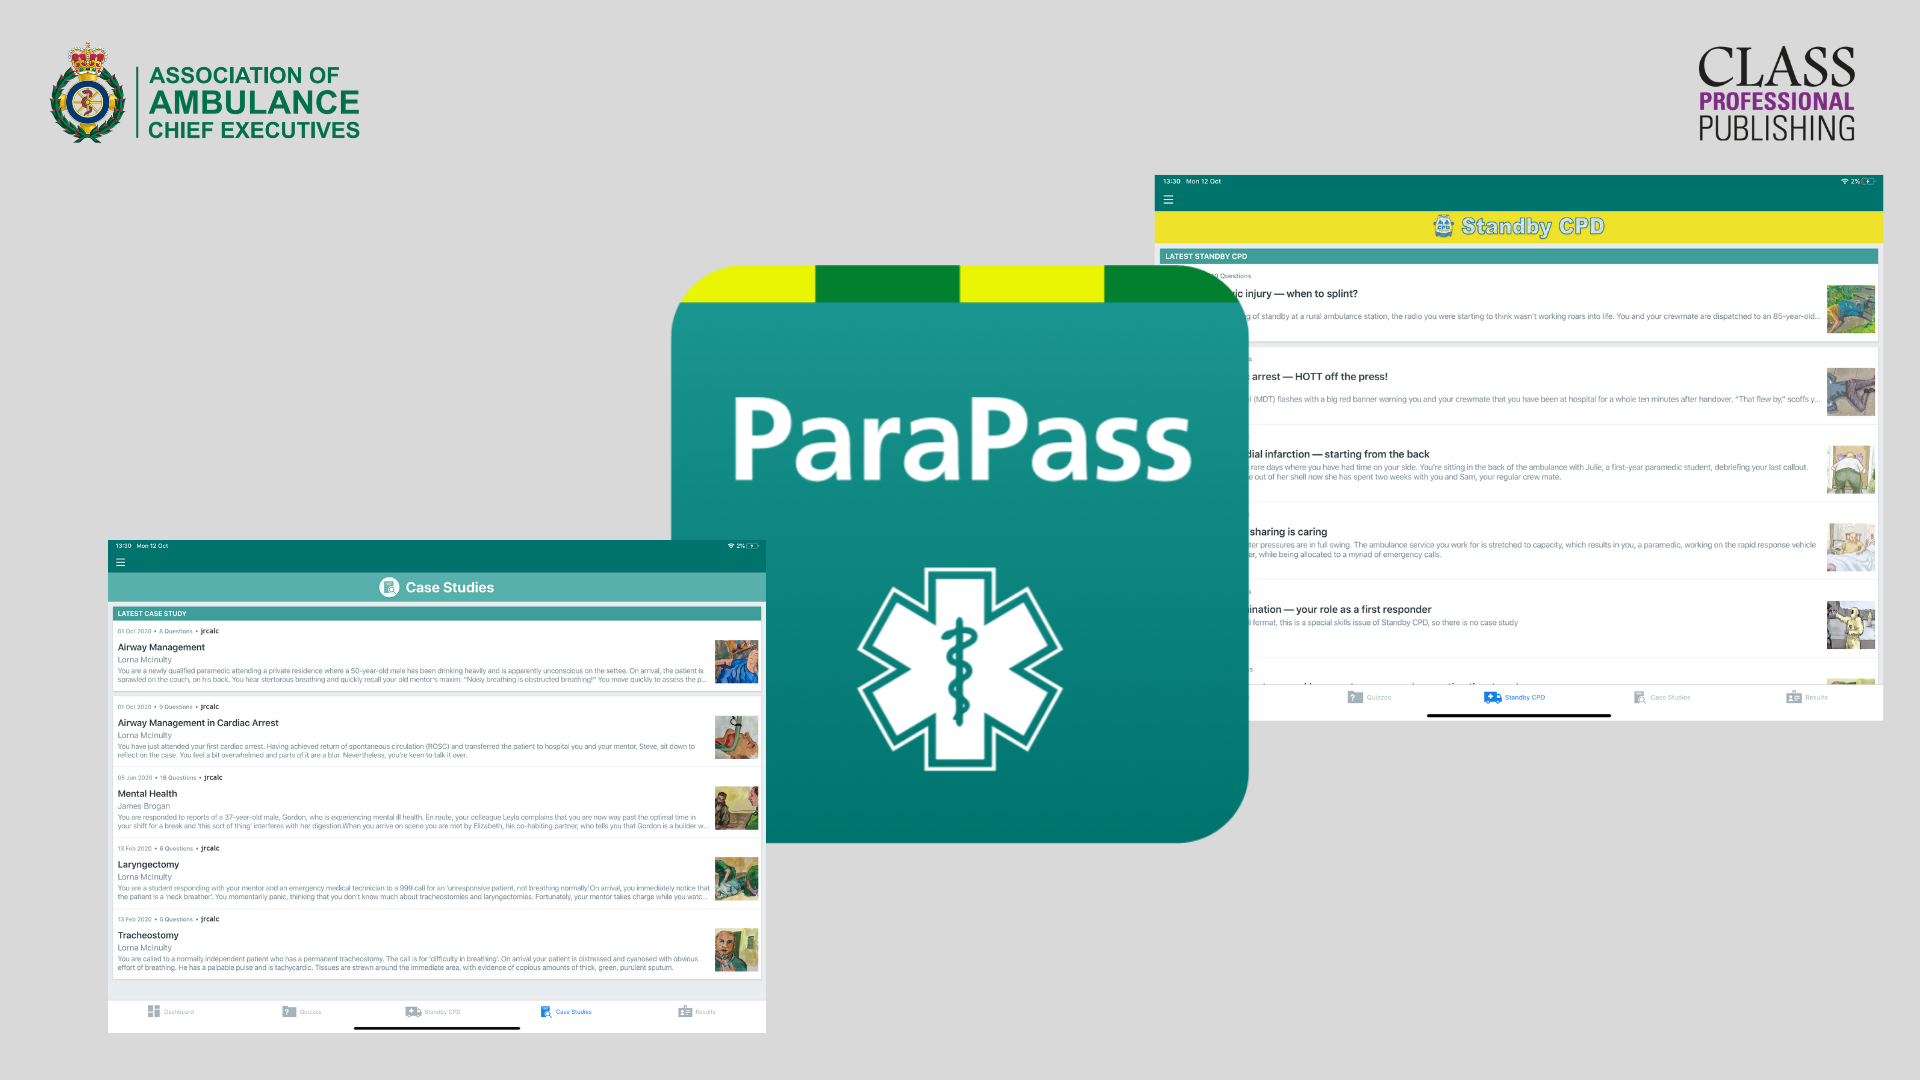 An Overview of ParaPass